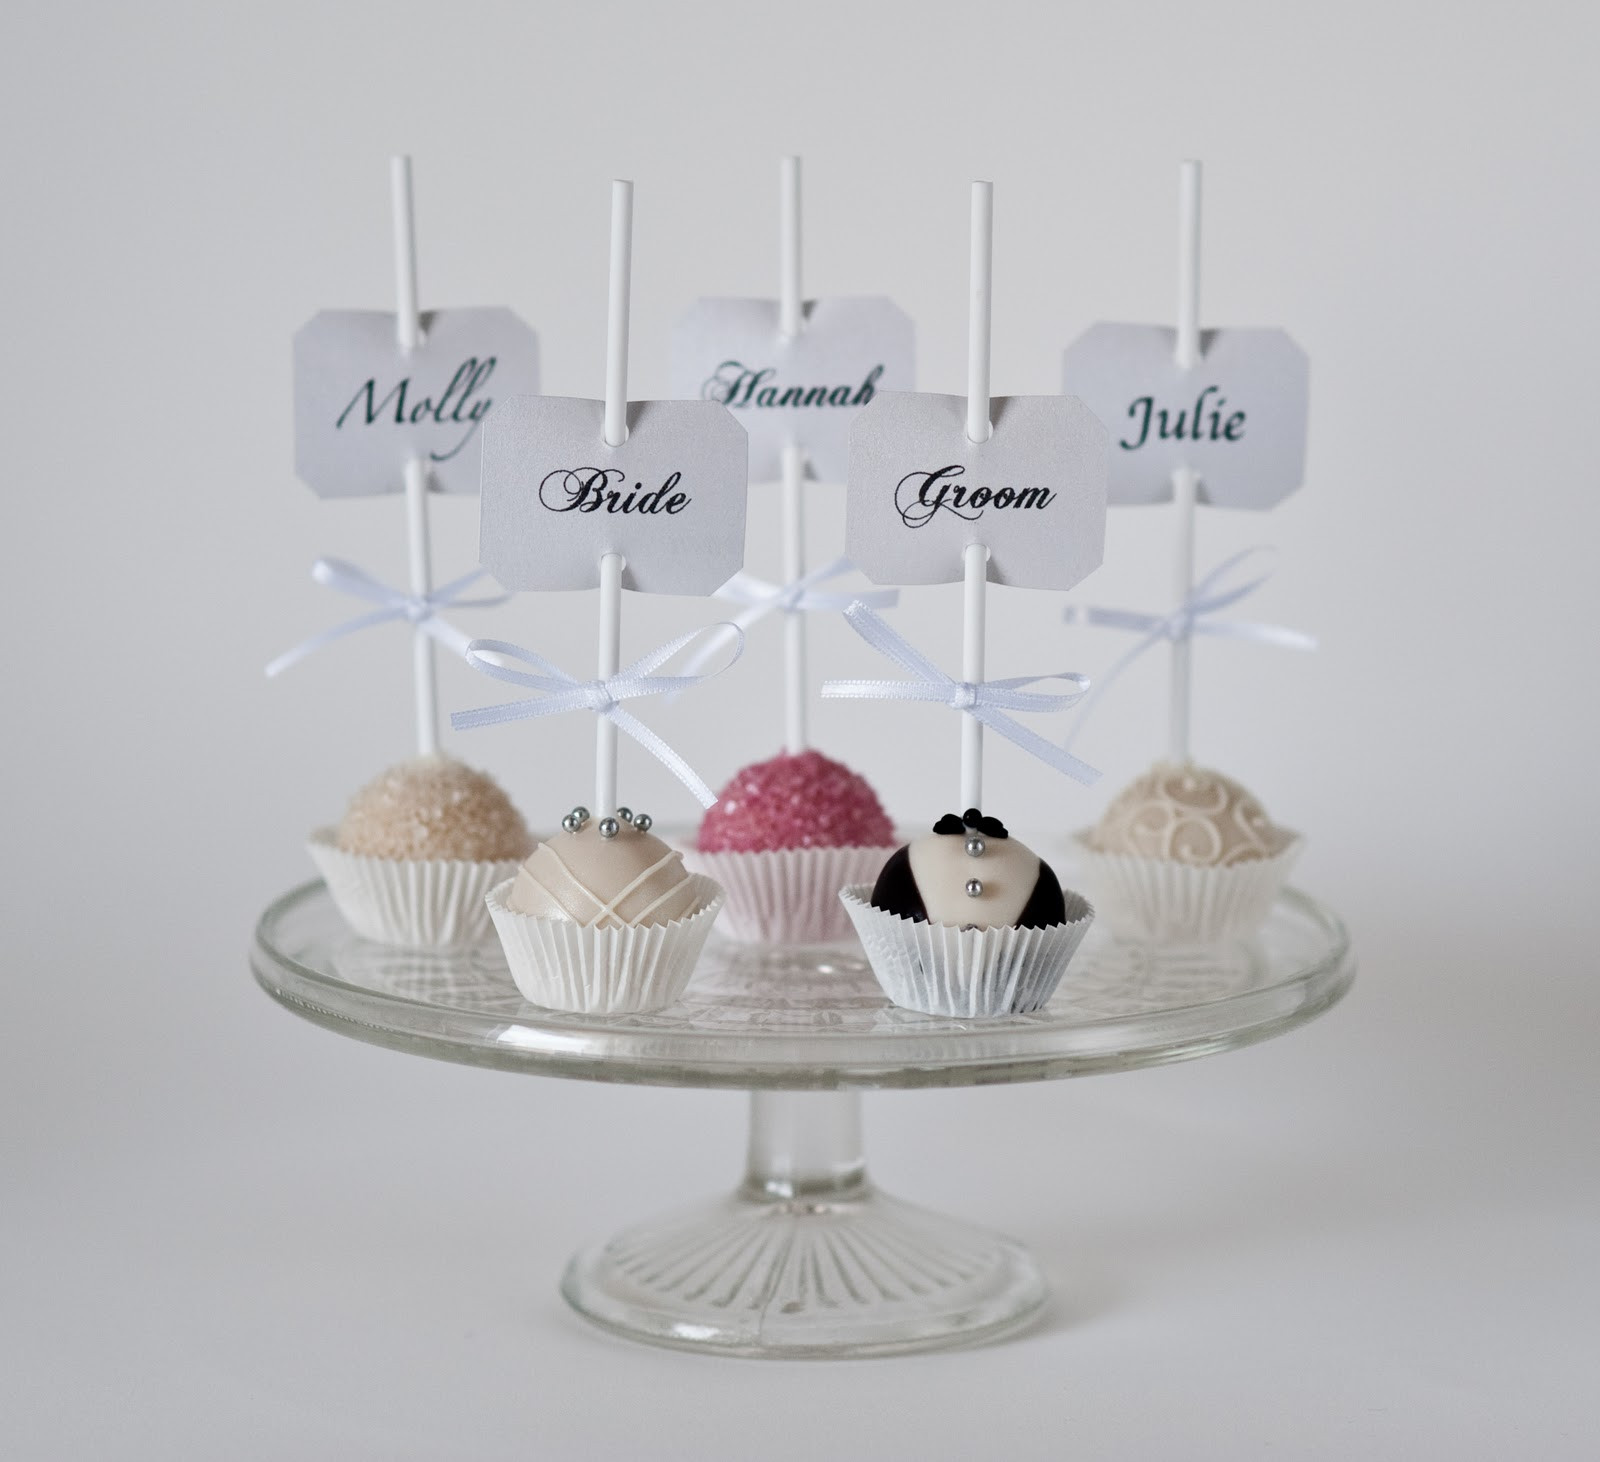 Wedding Cake Pop
 A Separate partment From cupcakes to popcakes